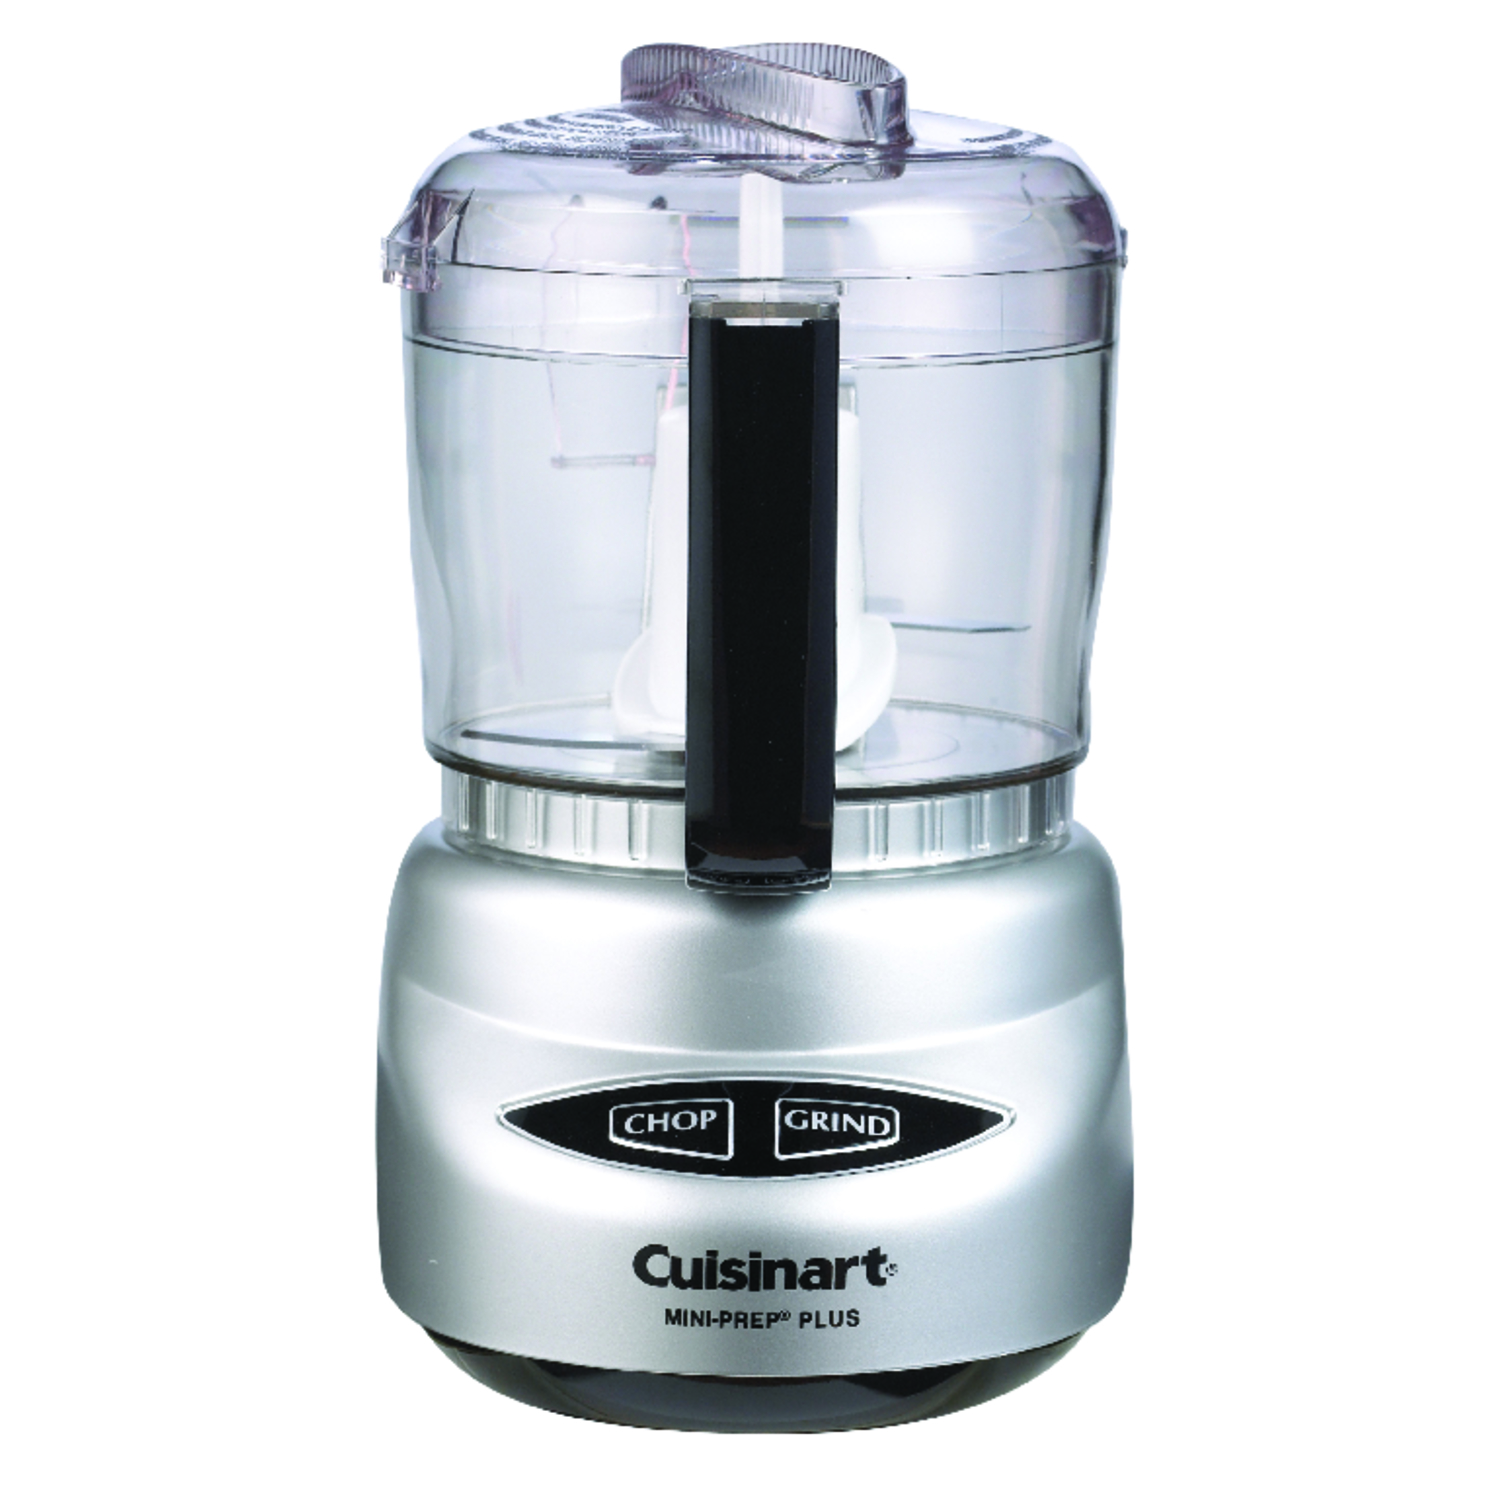 KitchenAid Go Cordless Food Chopper Battery Sold Separately Hearth & Hand with Magnolia